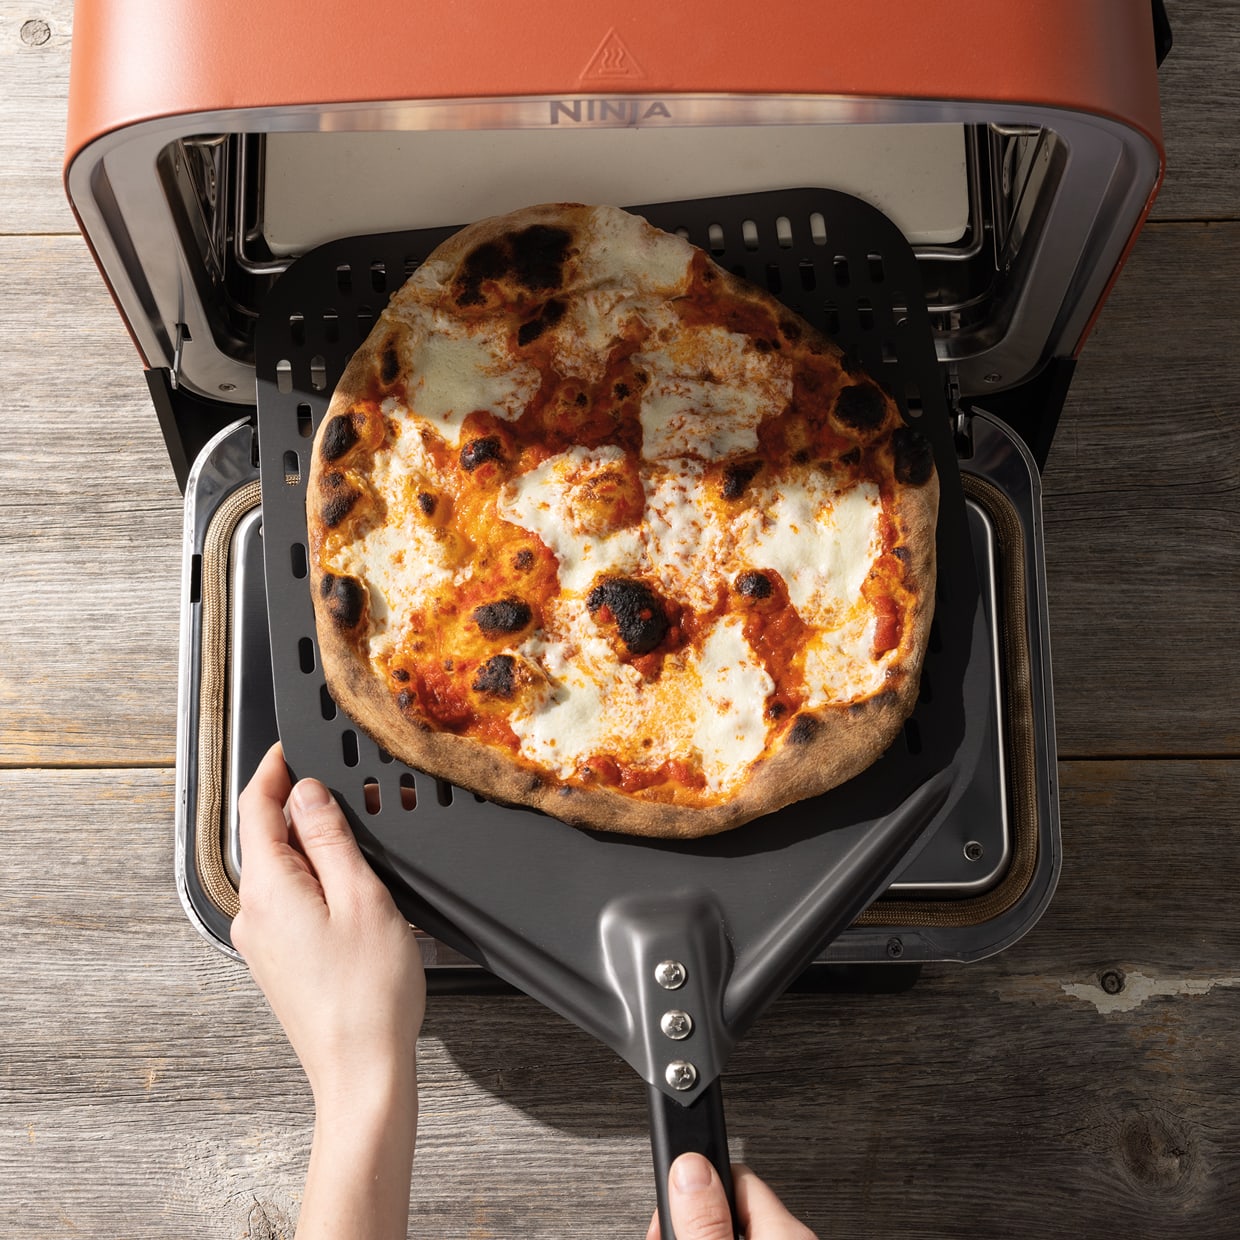 https://res.cloudinary.com/sharkninja-na/image/upload/v1686242671/NinjaUS/Category/Outdoor%20oven/6%20Build%20the%20Ultimate%20set%20up/1%20Perforated%20Pizza%20Peel/R_OO100Series_InUse_KS_ClassicPizza_6.jpg